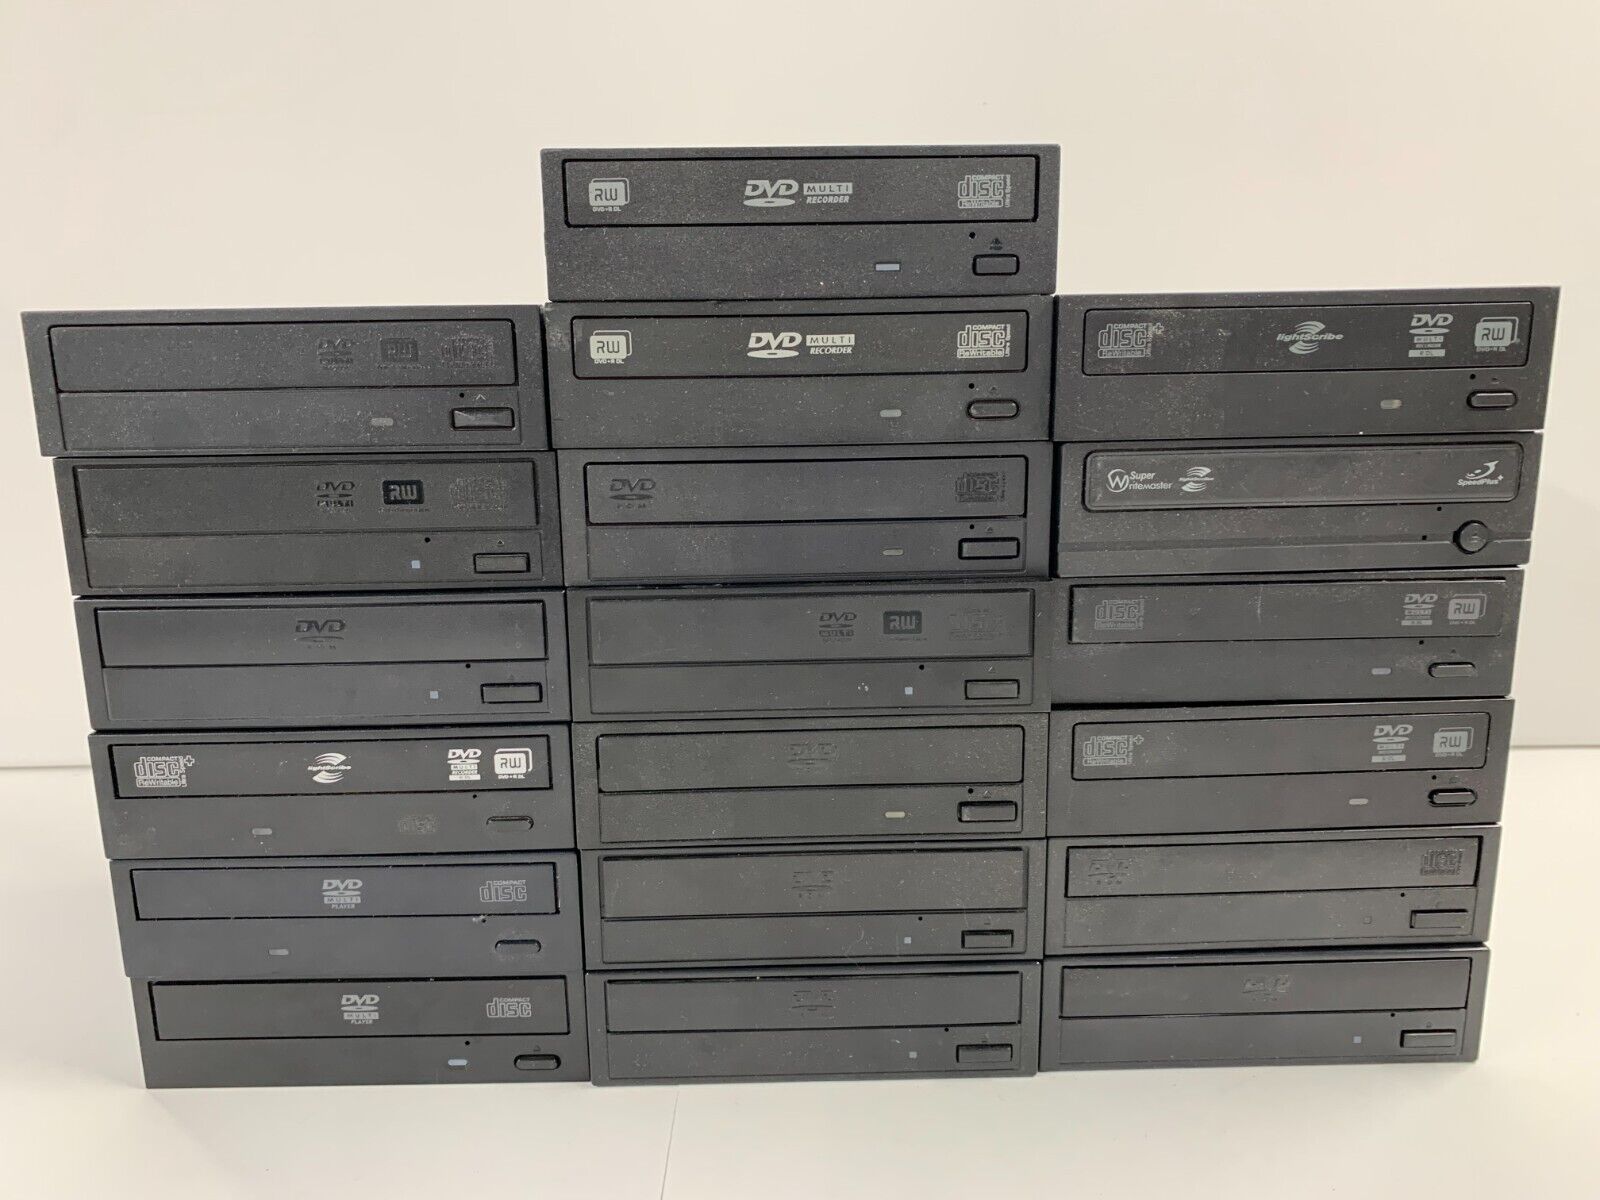 Large DVD-ROM CD Internal Drives Assorted Lot of 19